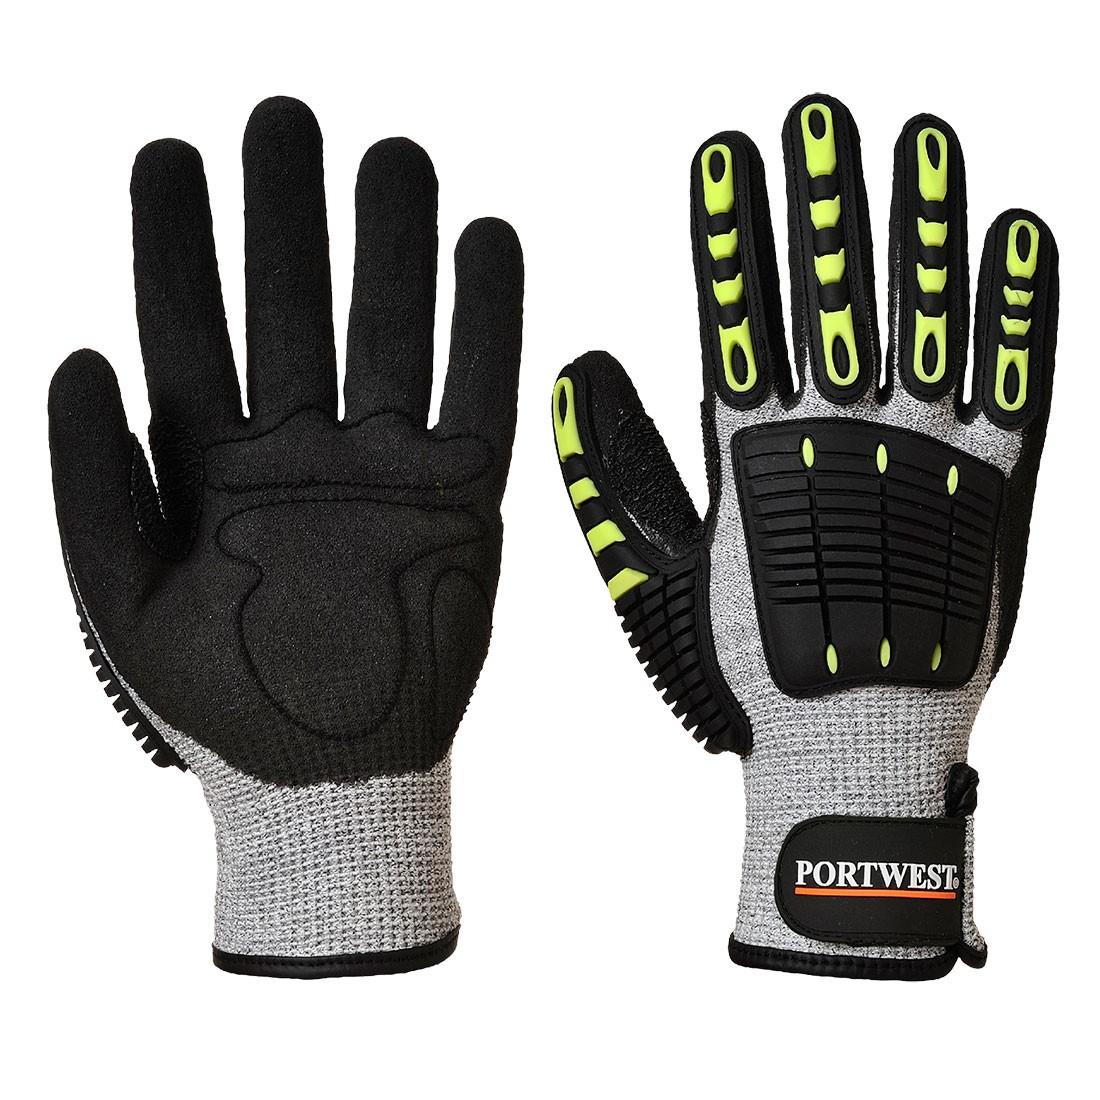 PORTWEST A722 - Anti Impact Cut Resistant Glove - Safetyware Sdn Bhd